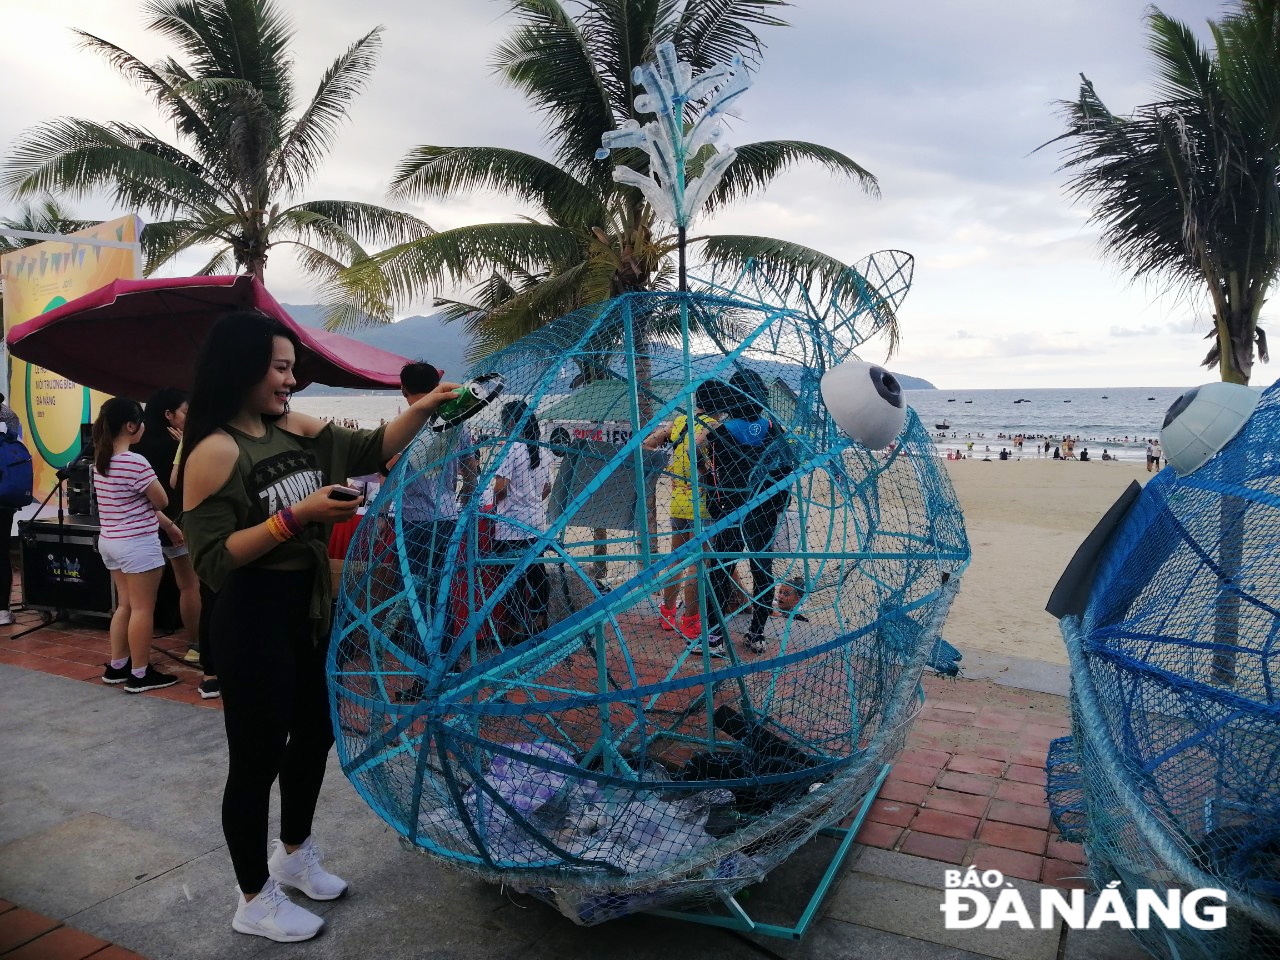 Many locals and visitors are seen showing their interest in creative sculptures featuring gobies swallowing plastic waste